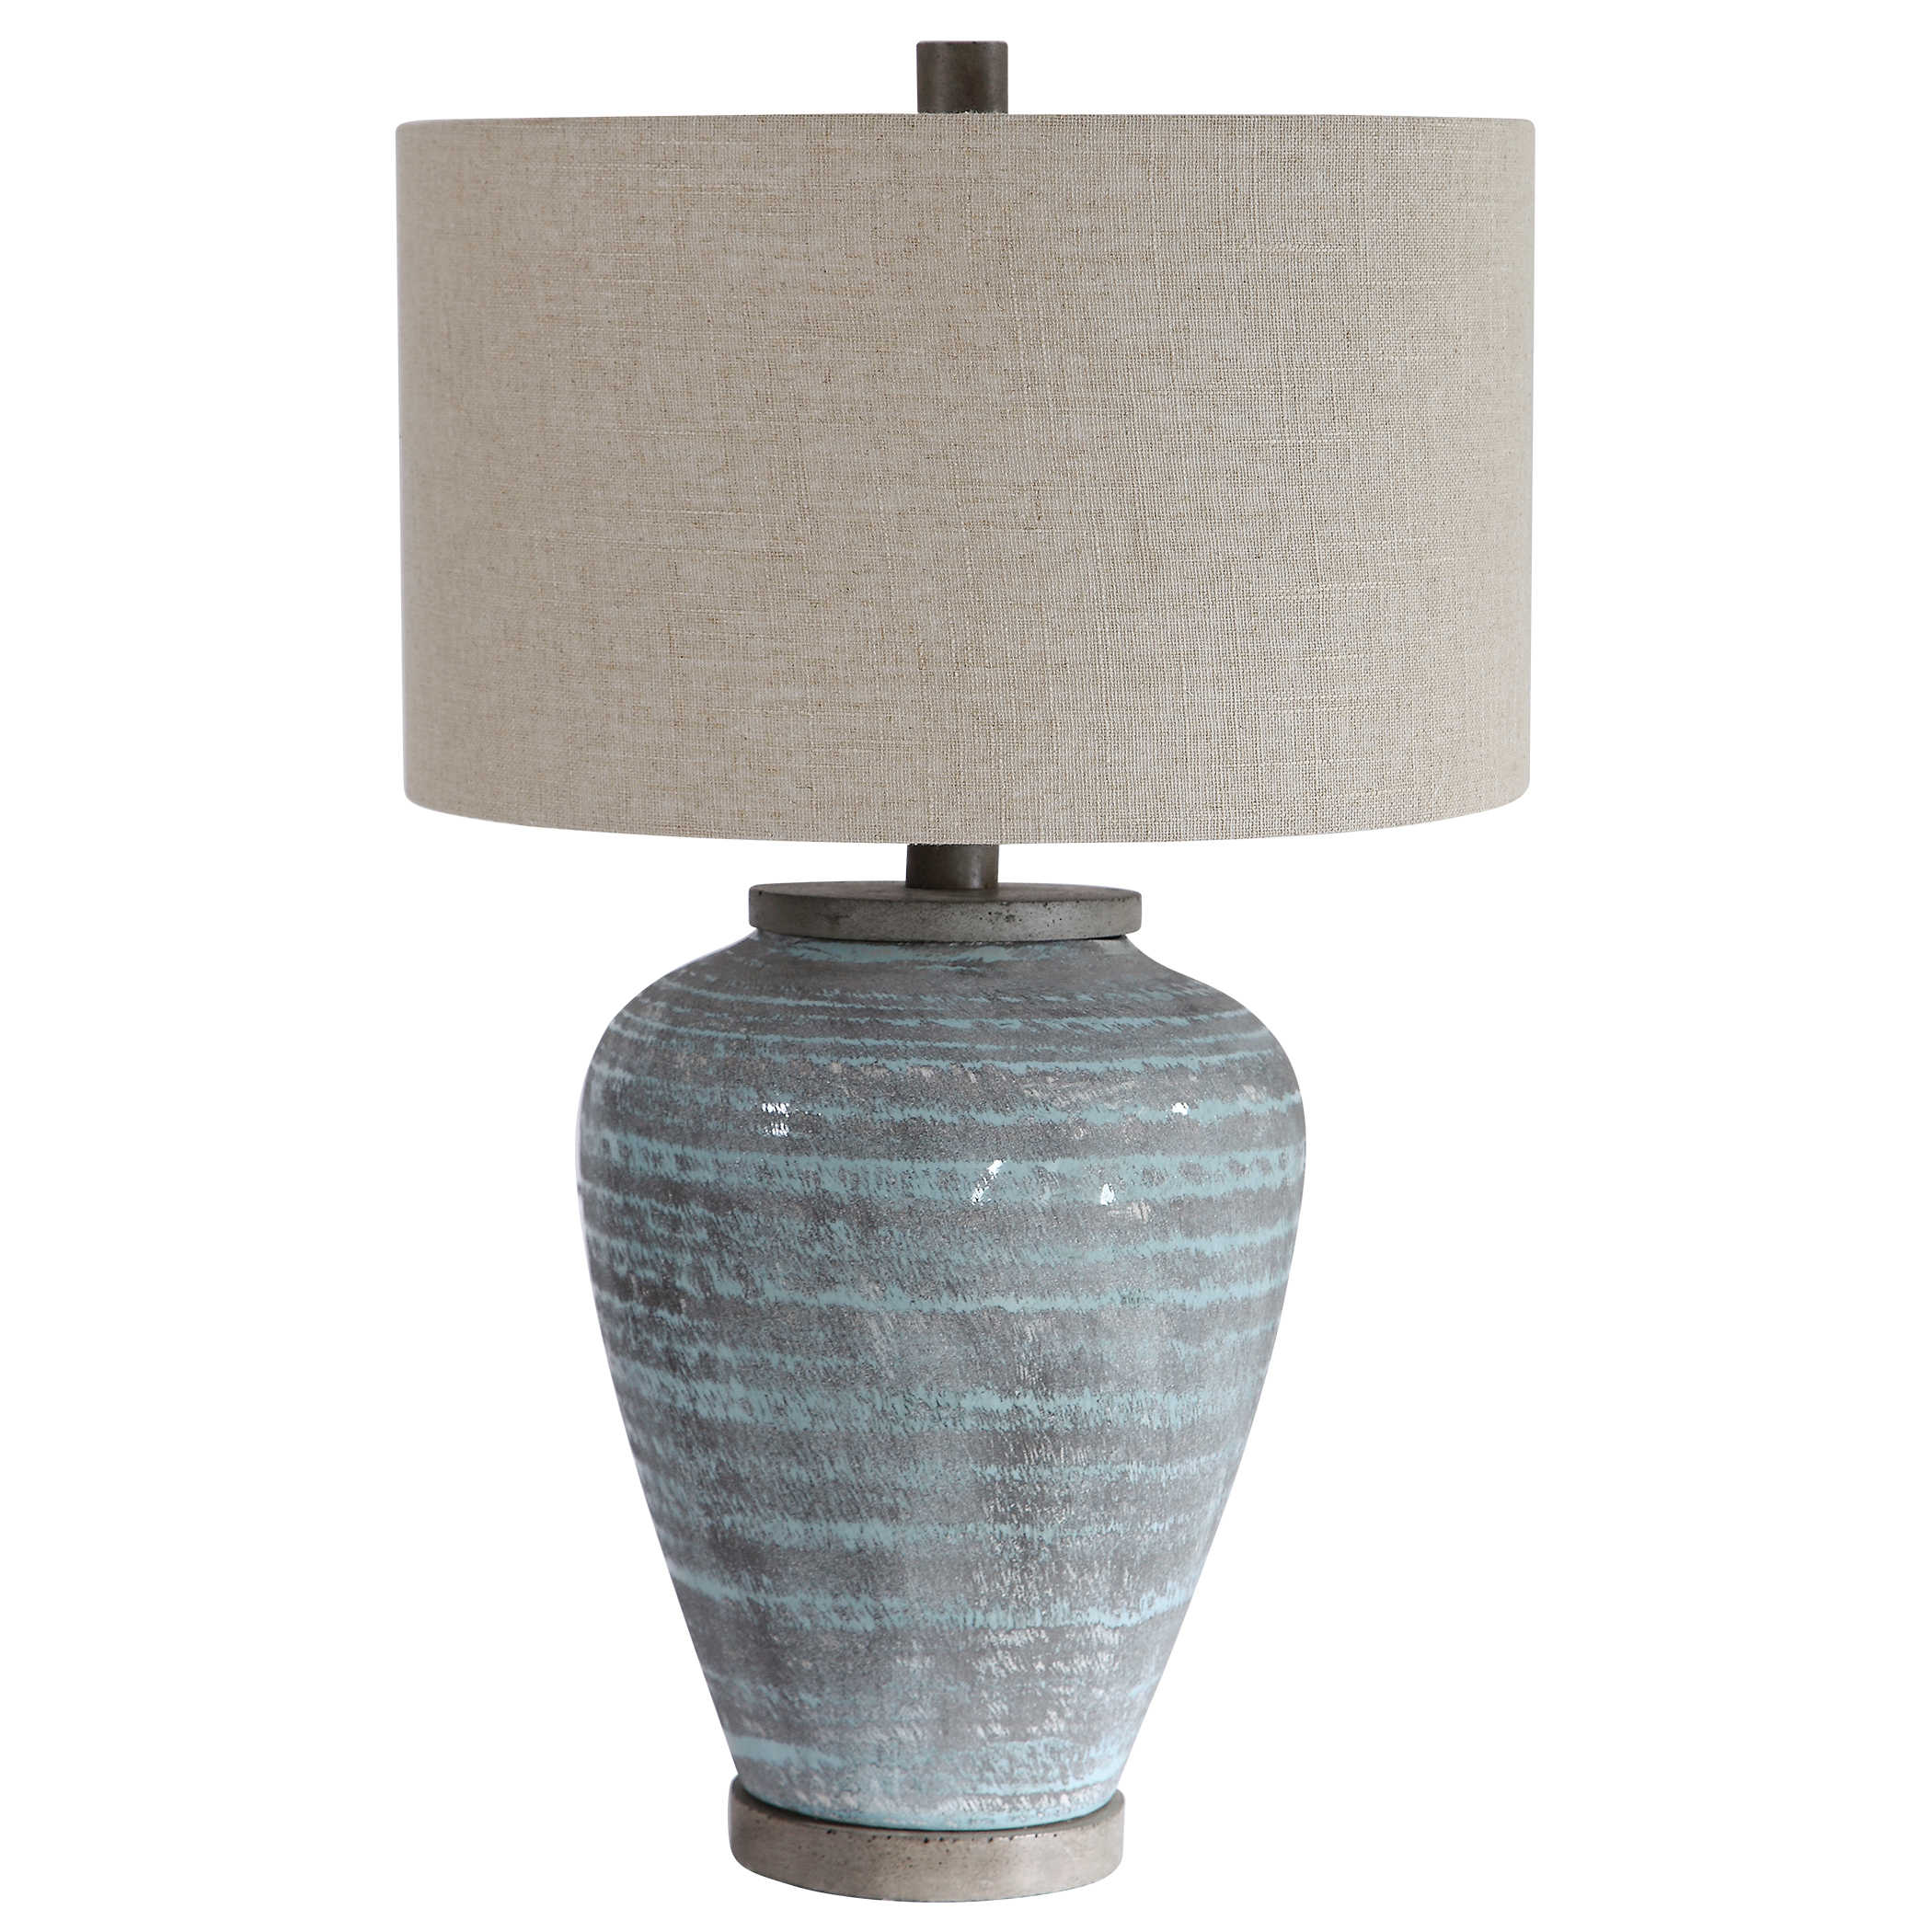 Felice Dark Charcoal Accent Ceramic Table Lamp by Uttermost #29366-1